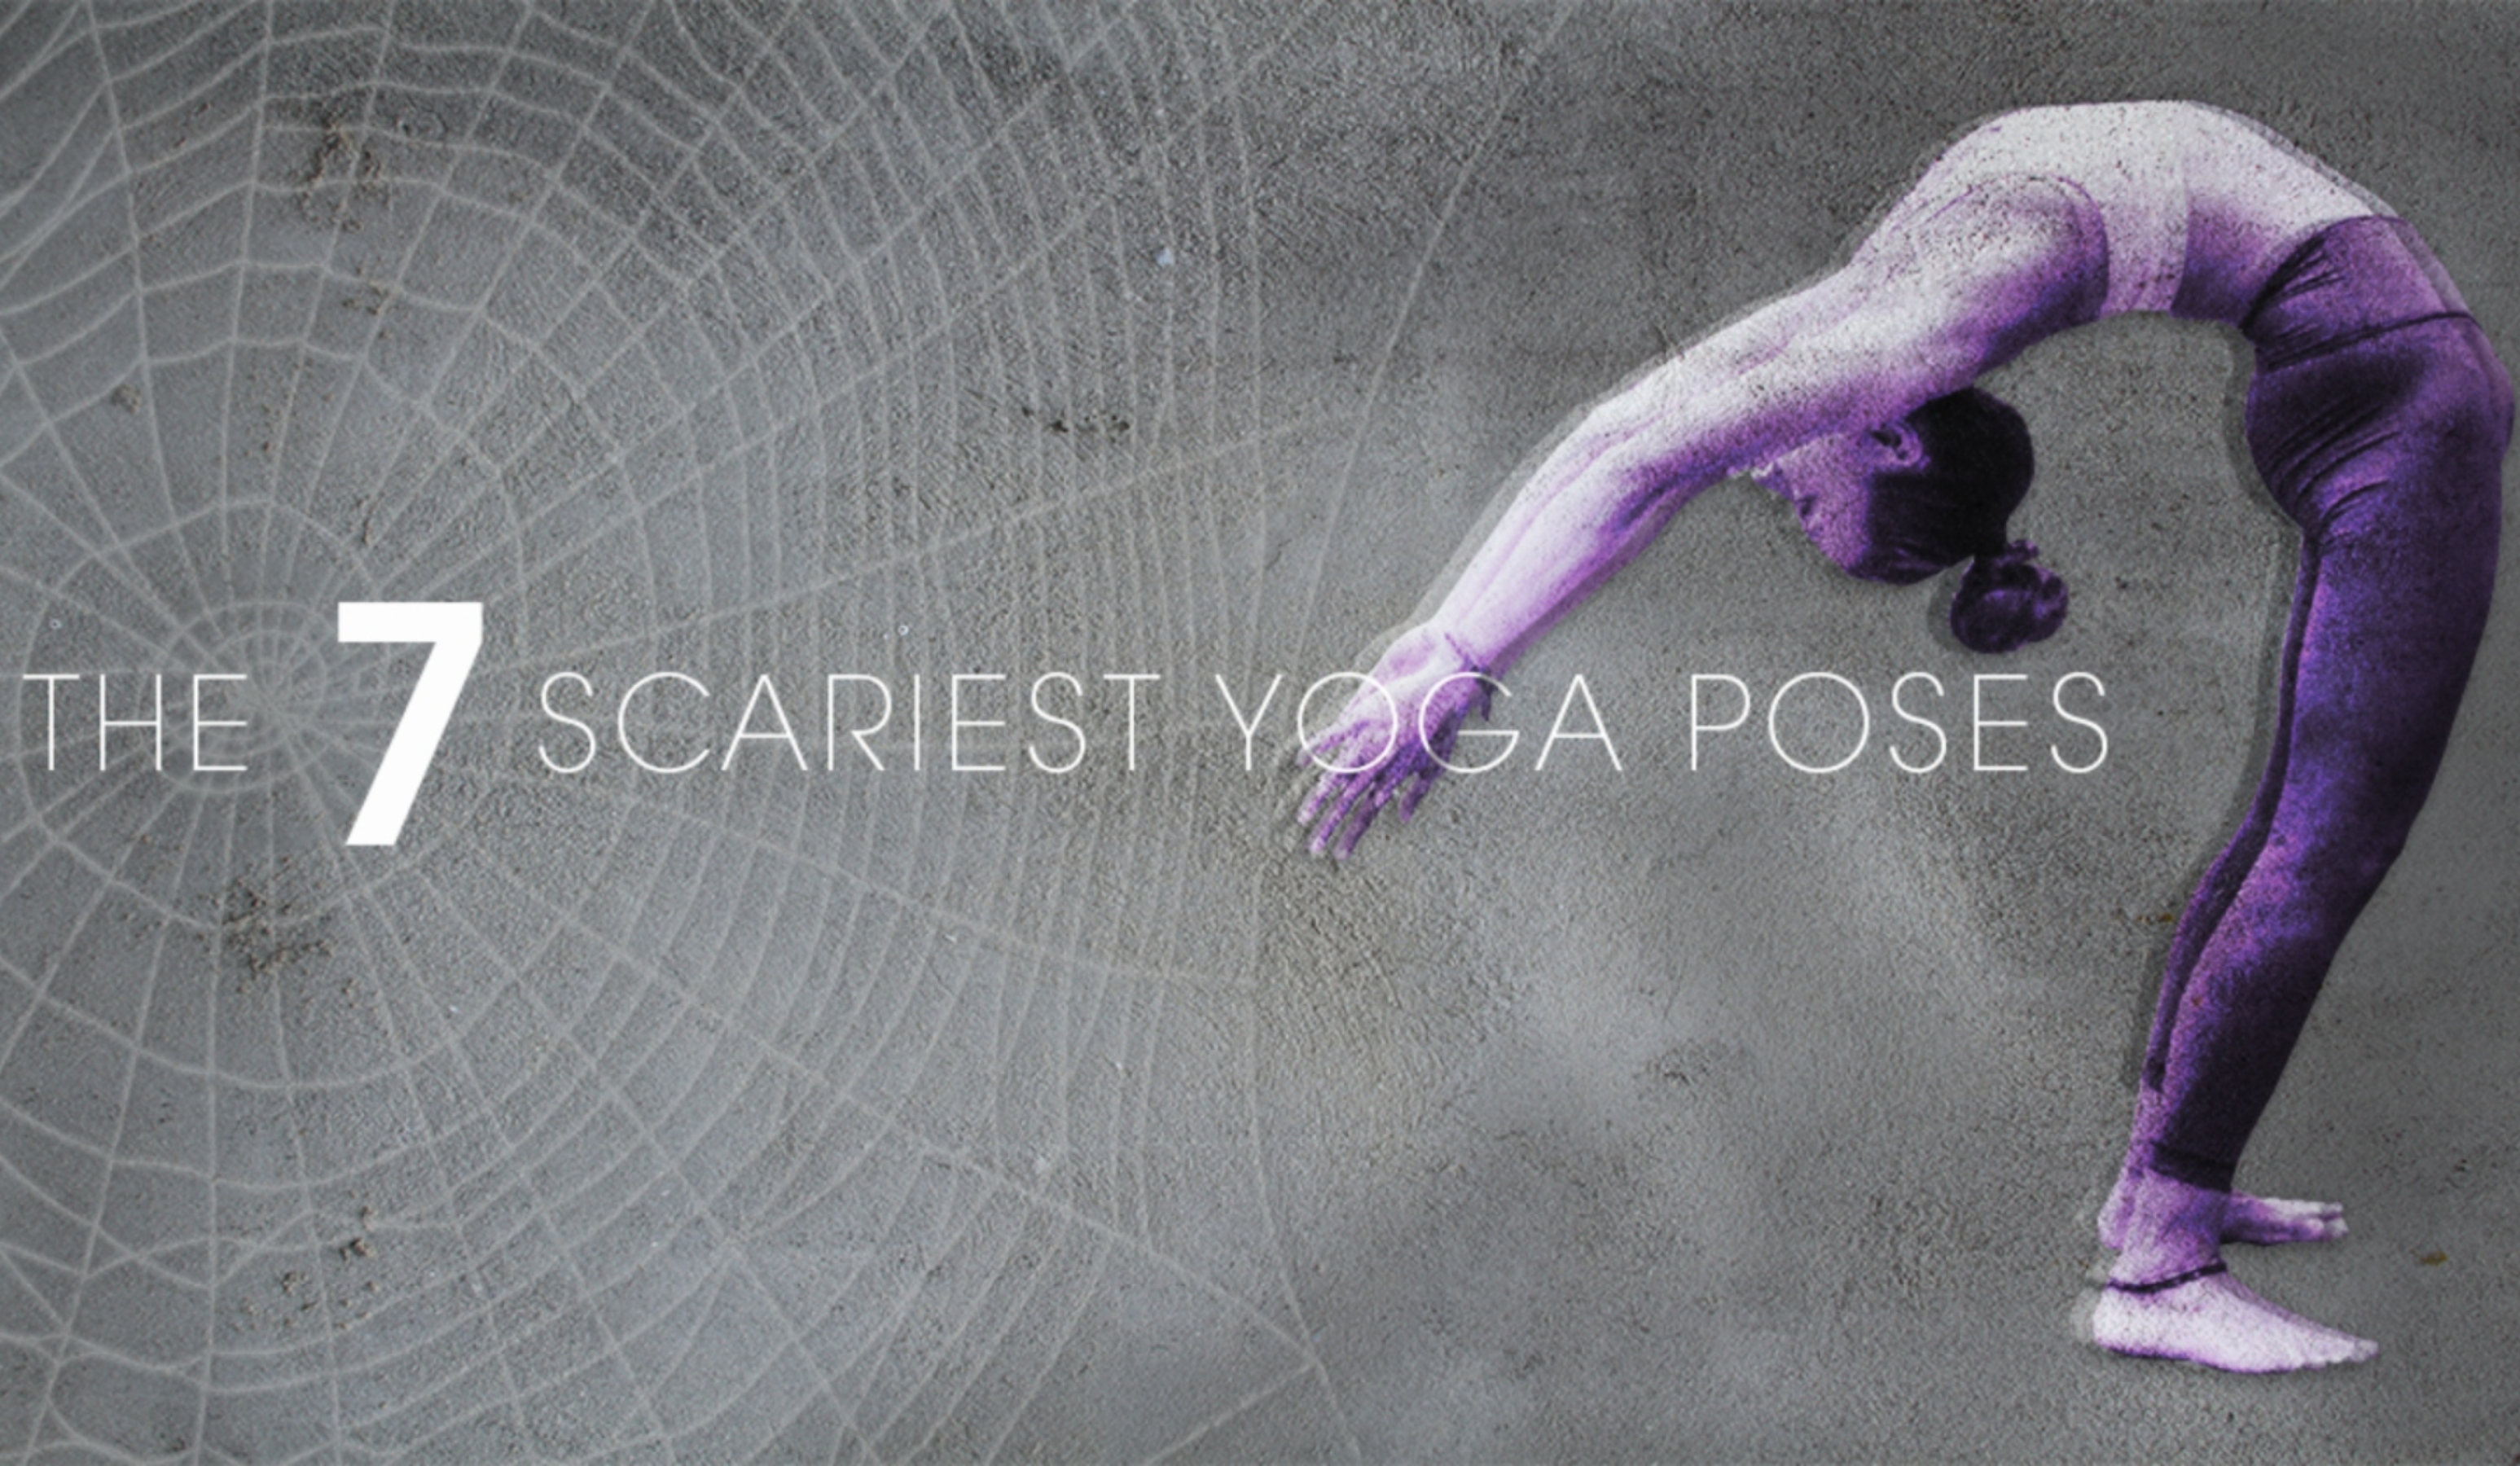 The 7 Scariest Yoga Poses for Halloween